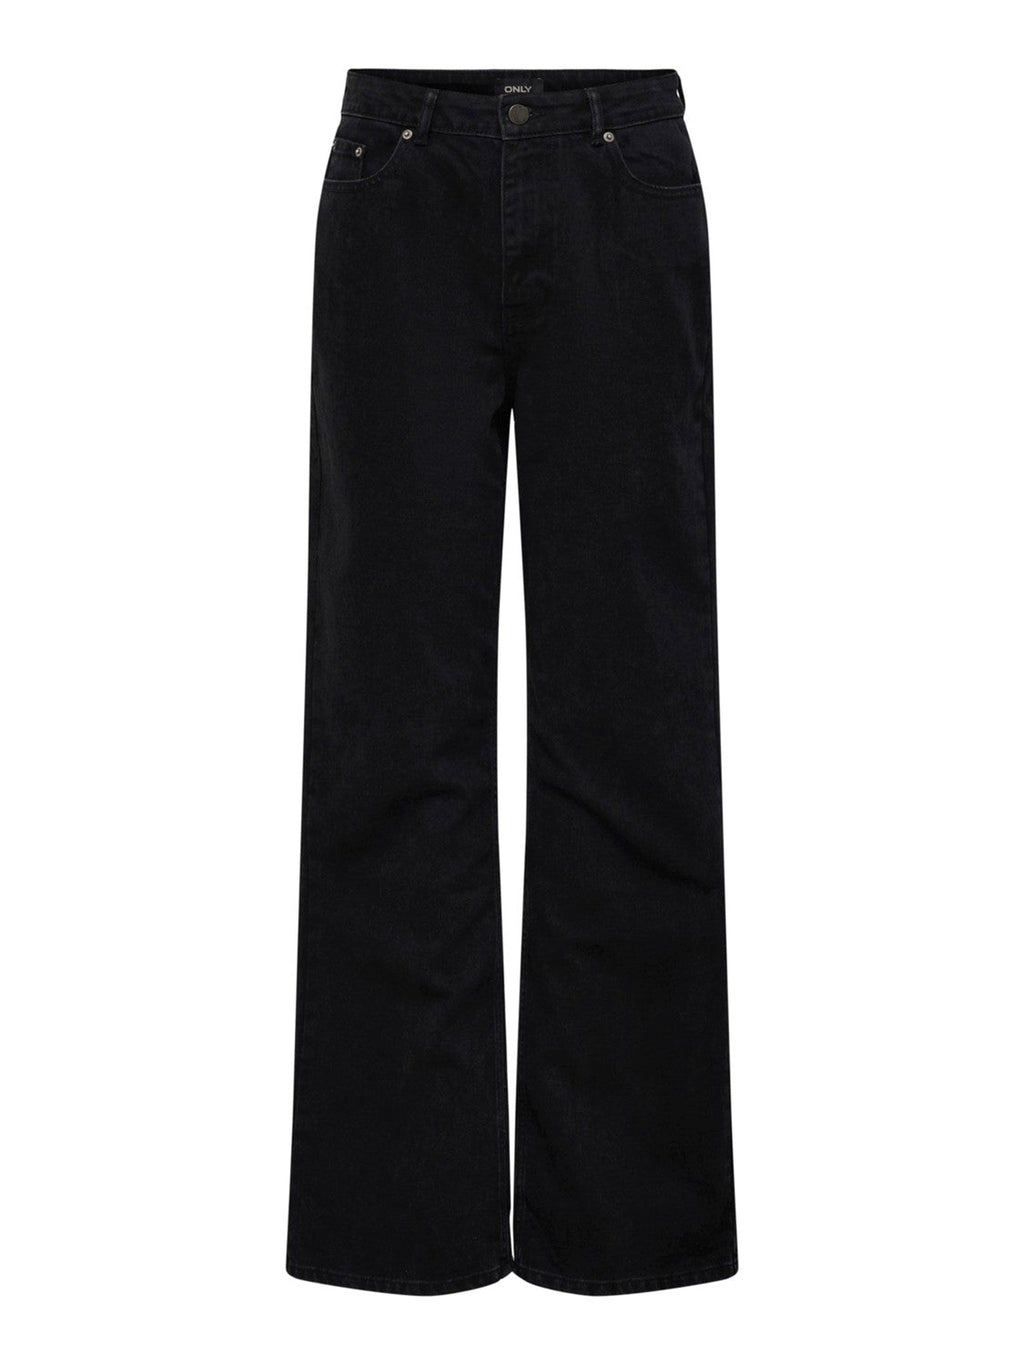 Jeans cos leathan Camille - denim dubh